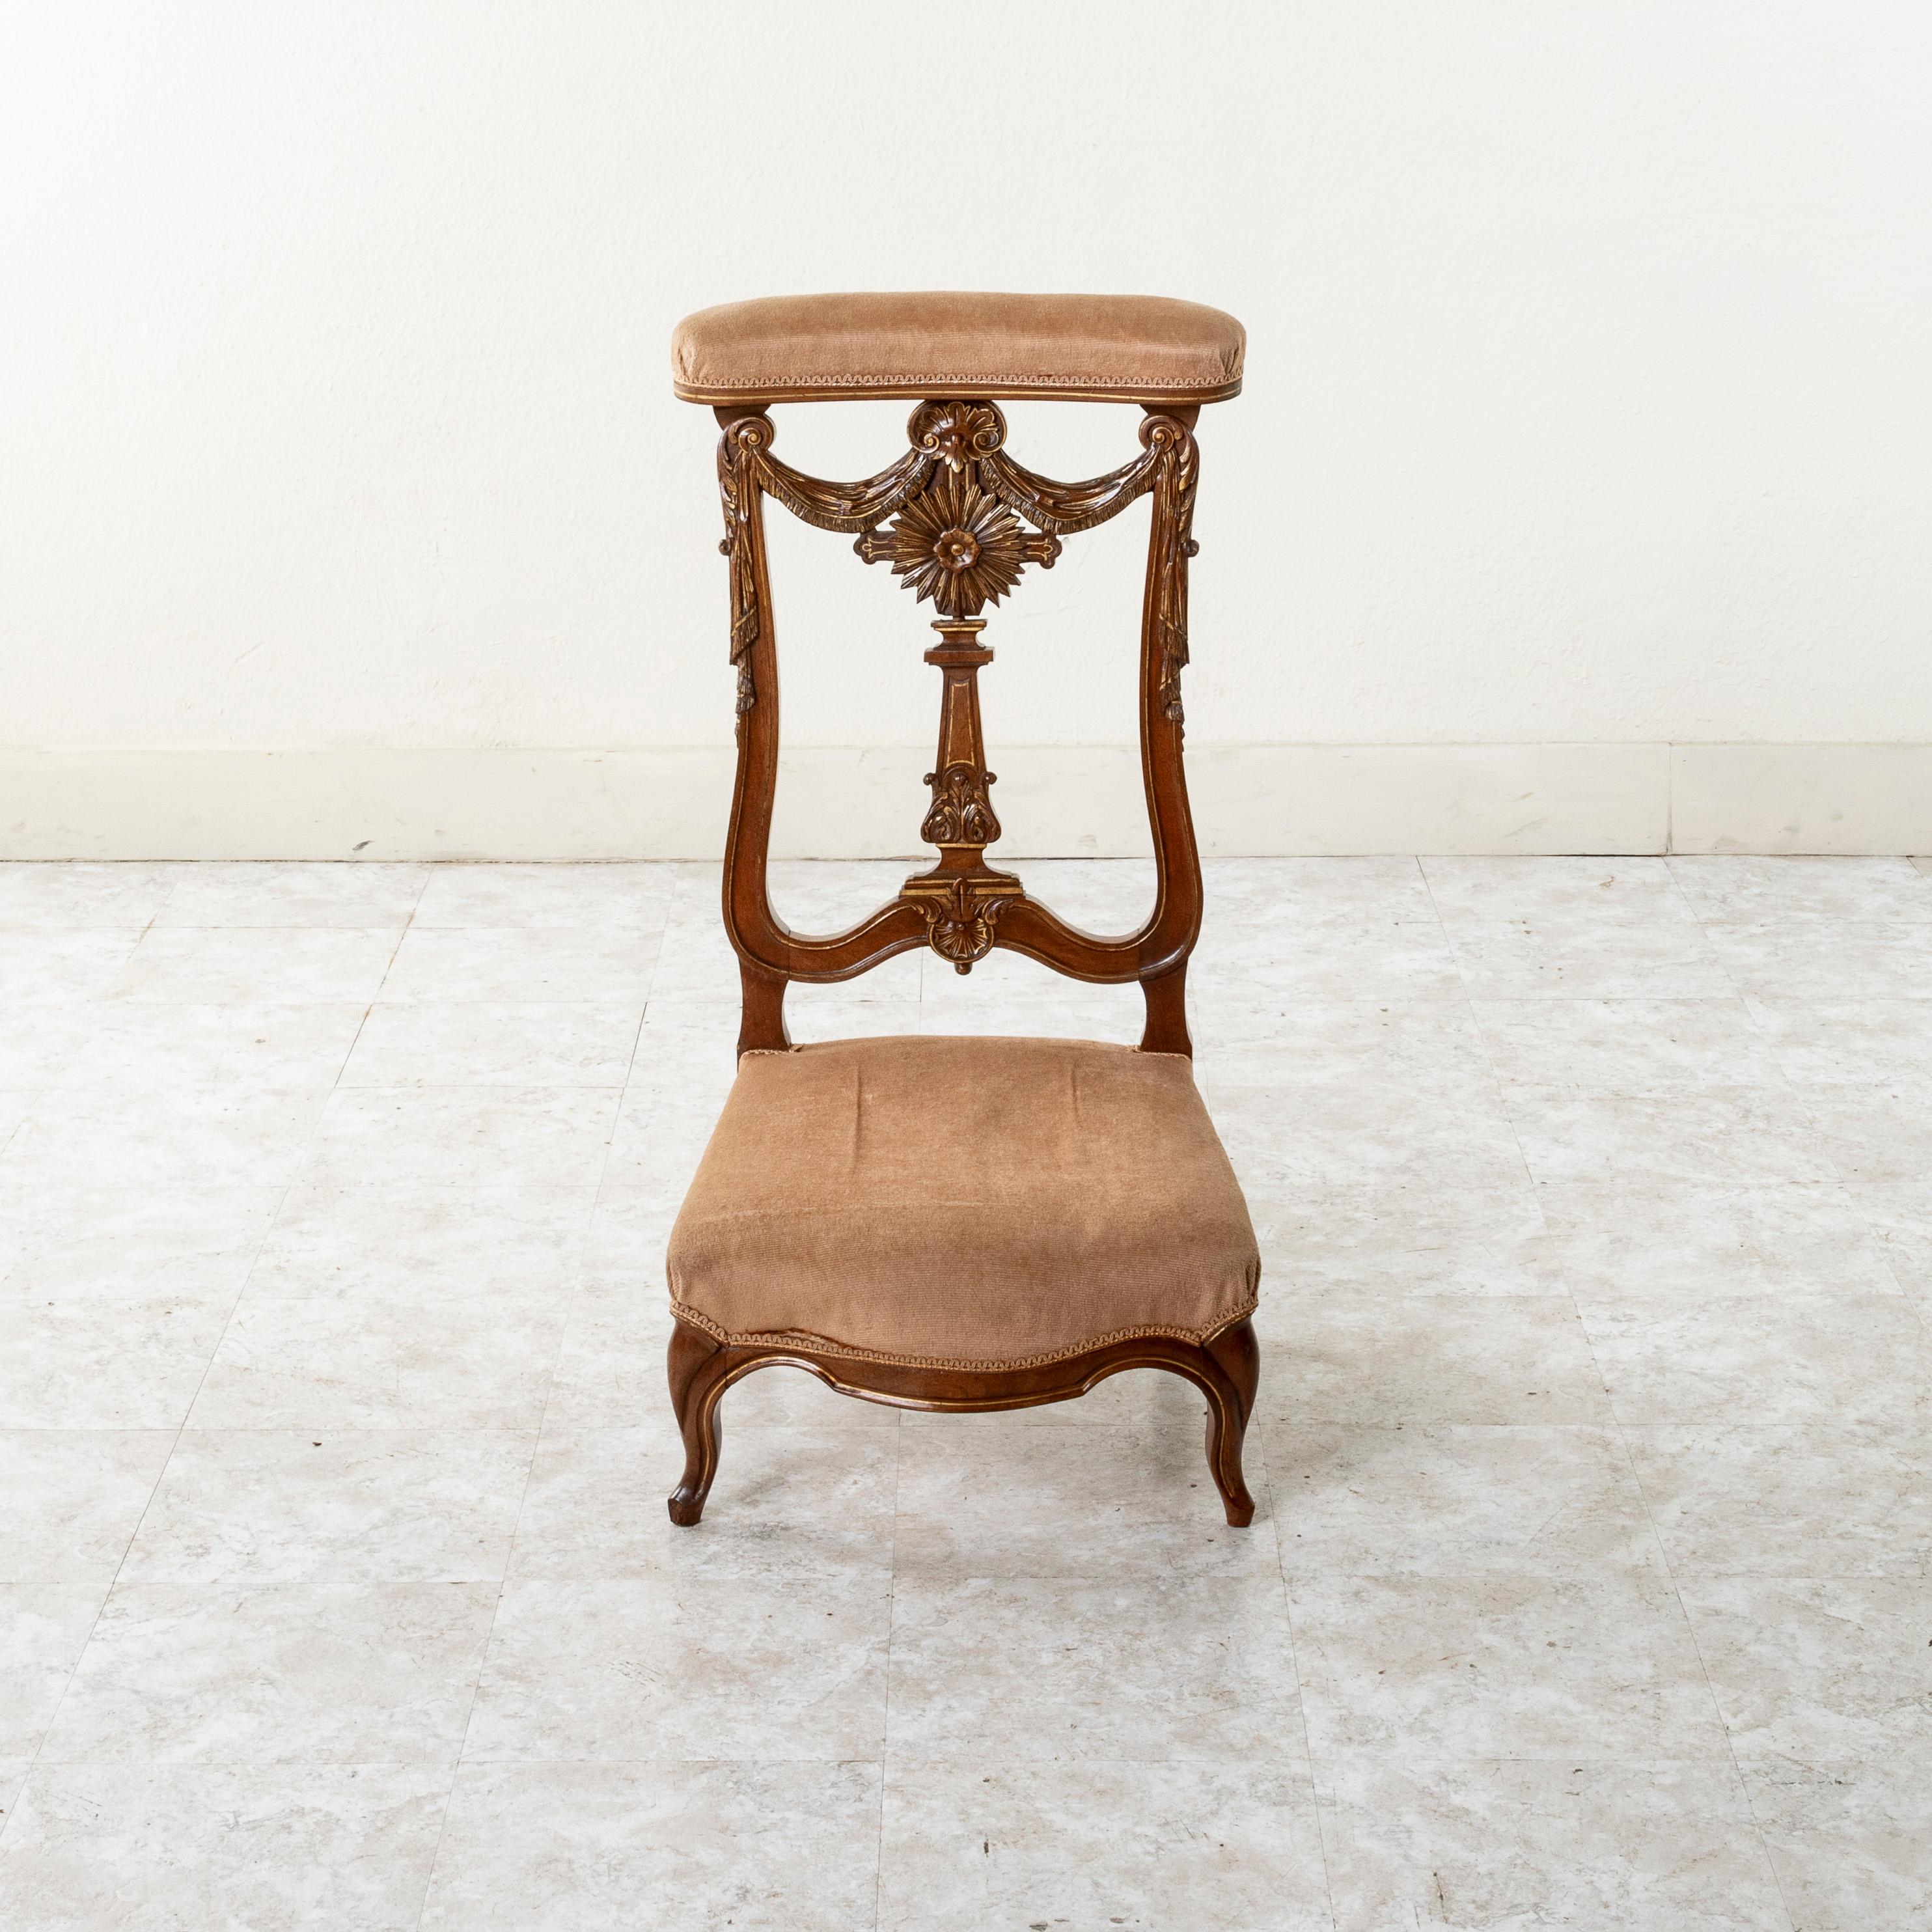 Mid-19th Century French Hand-Carved Walnut Prie Dieu or Prayer Chair In Good Condition For Sale In Fayetteville, AR